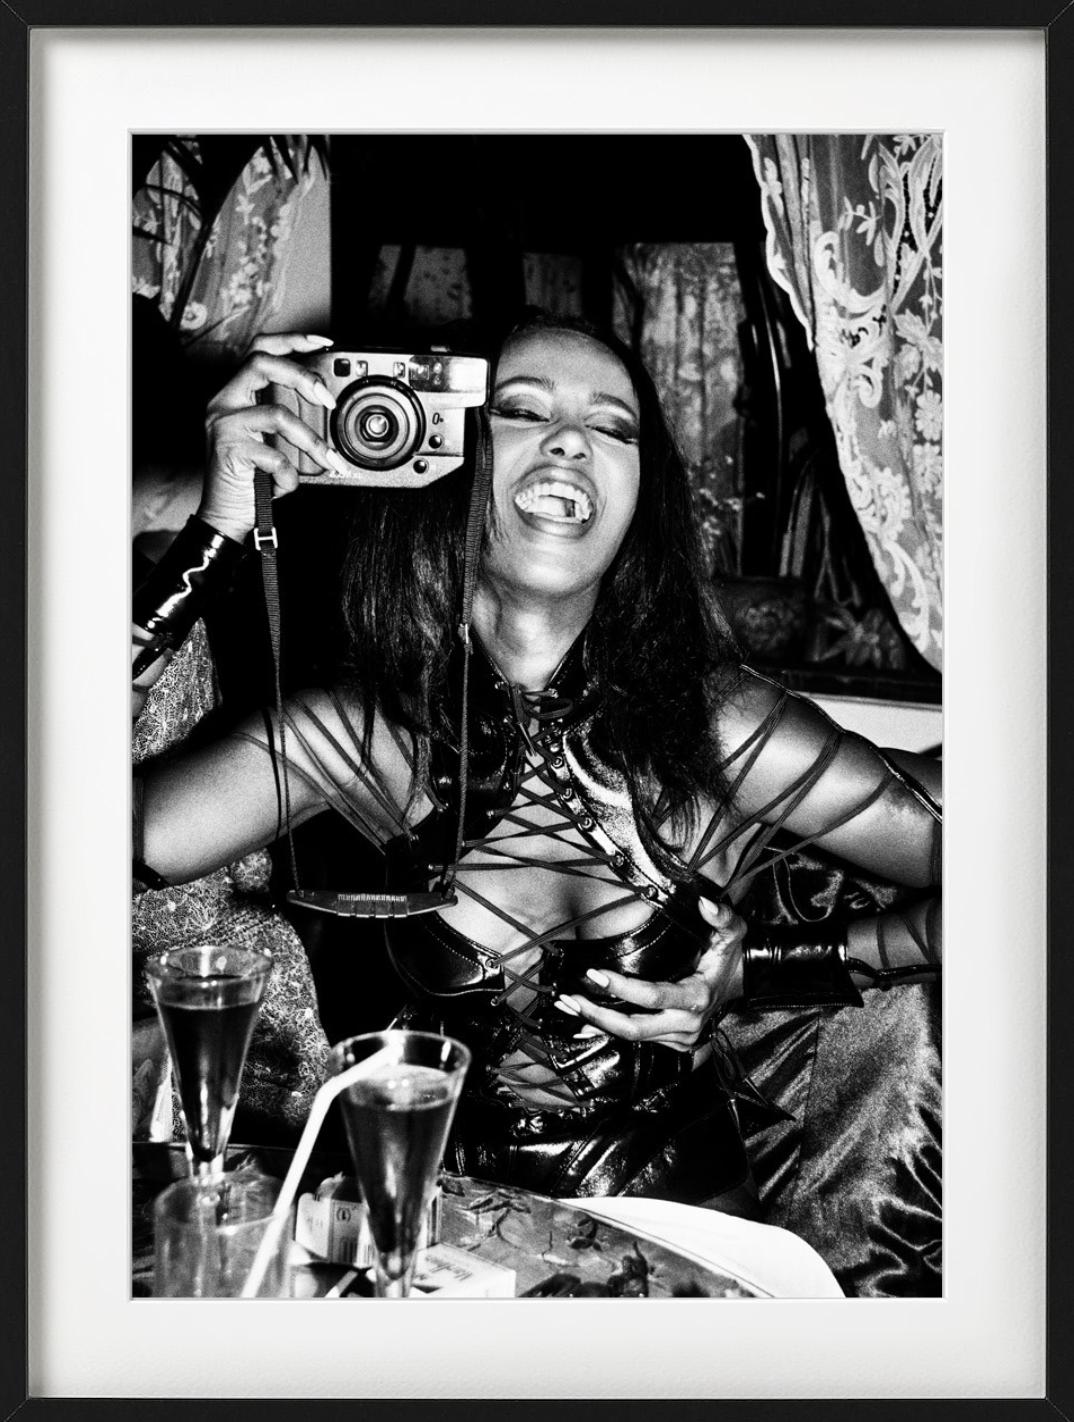 Iman, Paris - black-and-white portrait of model Iman in corsage with camera  - Photograph by Roxanne Lowit